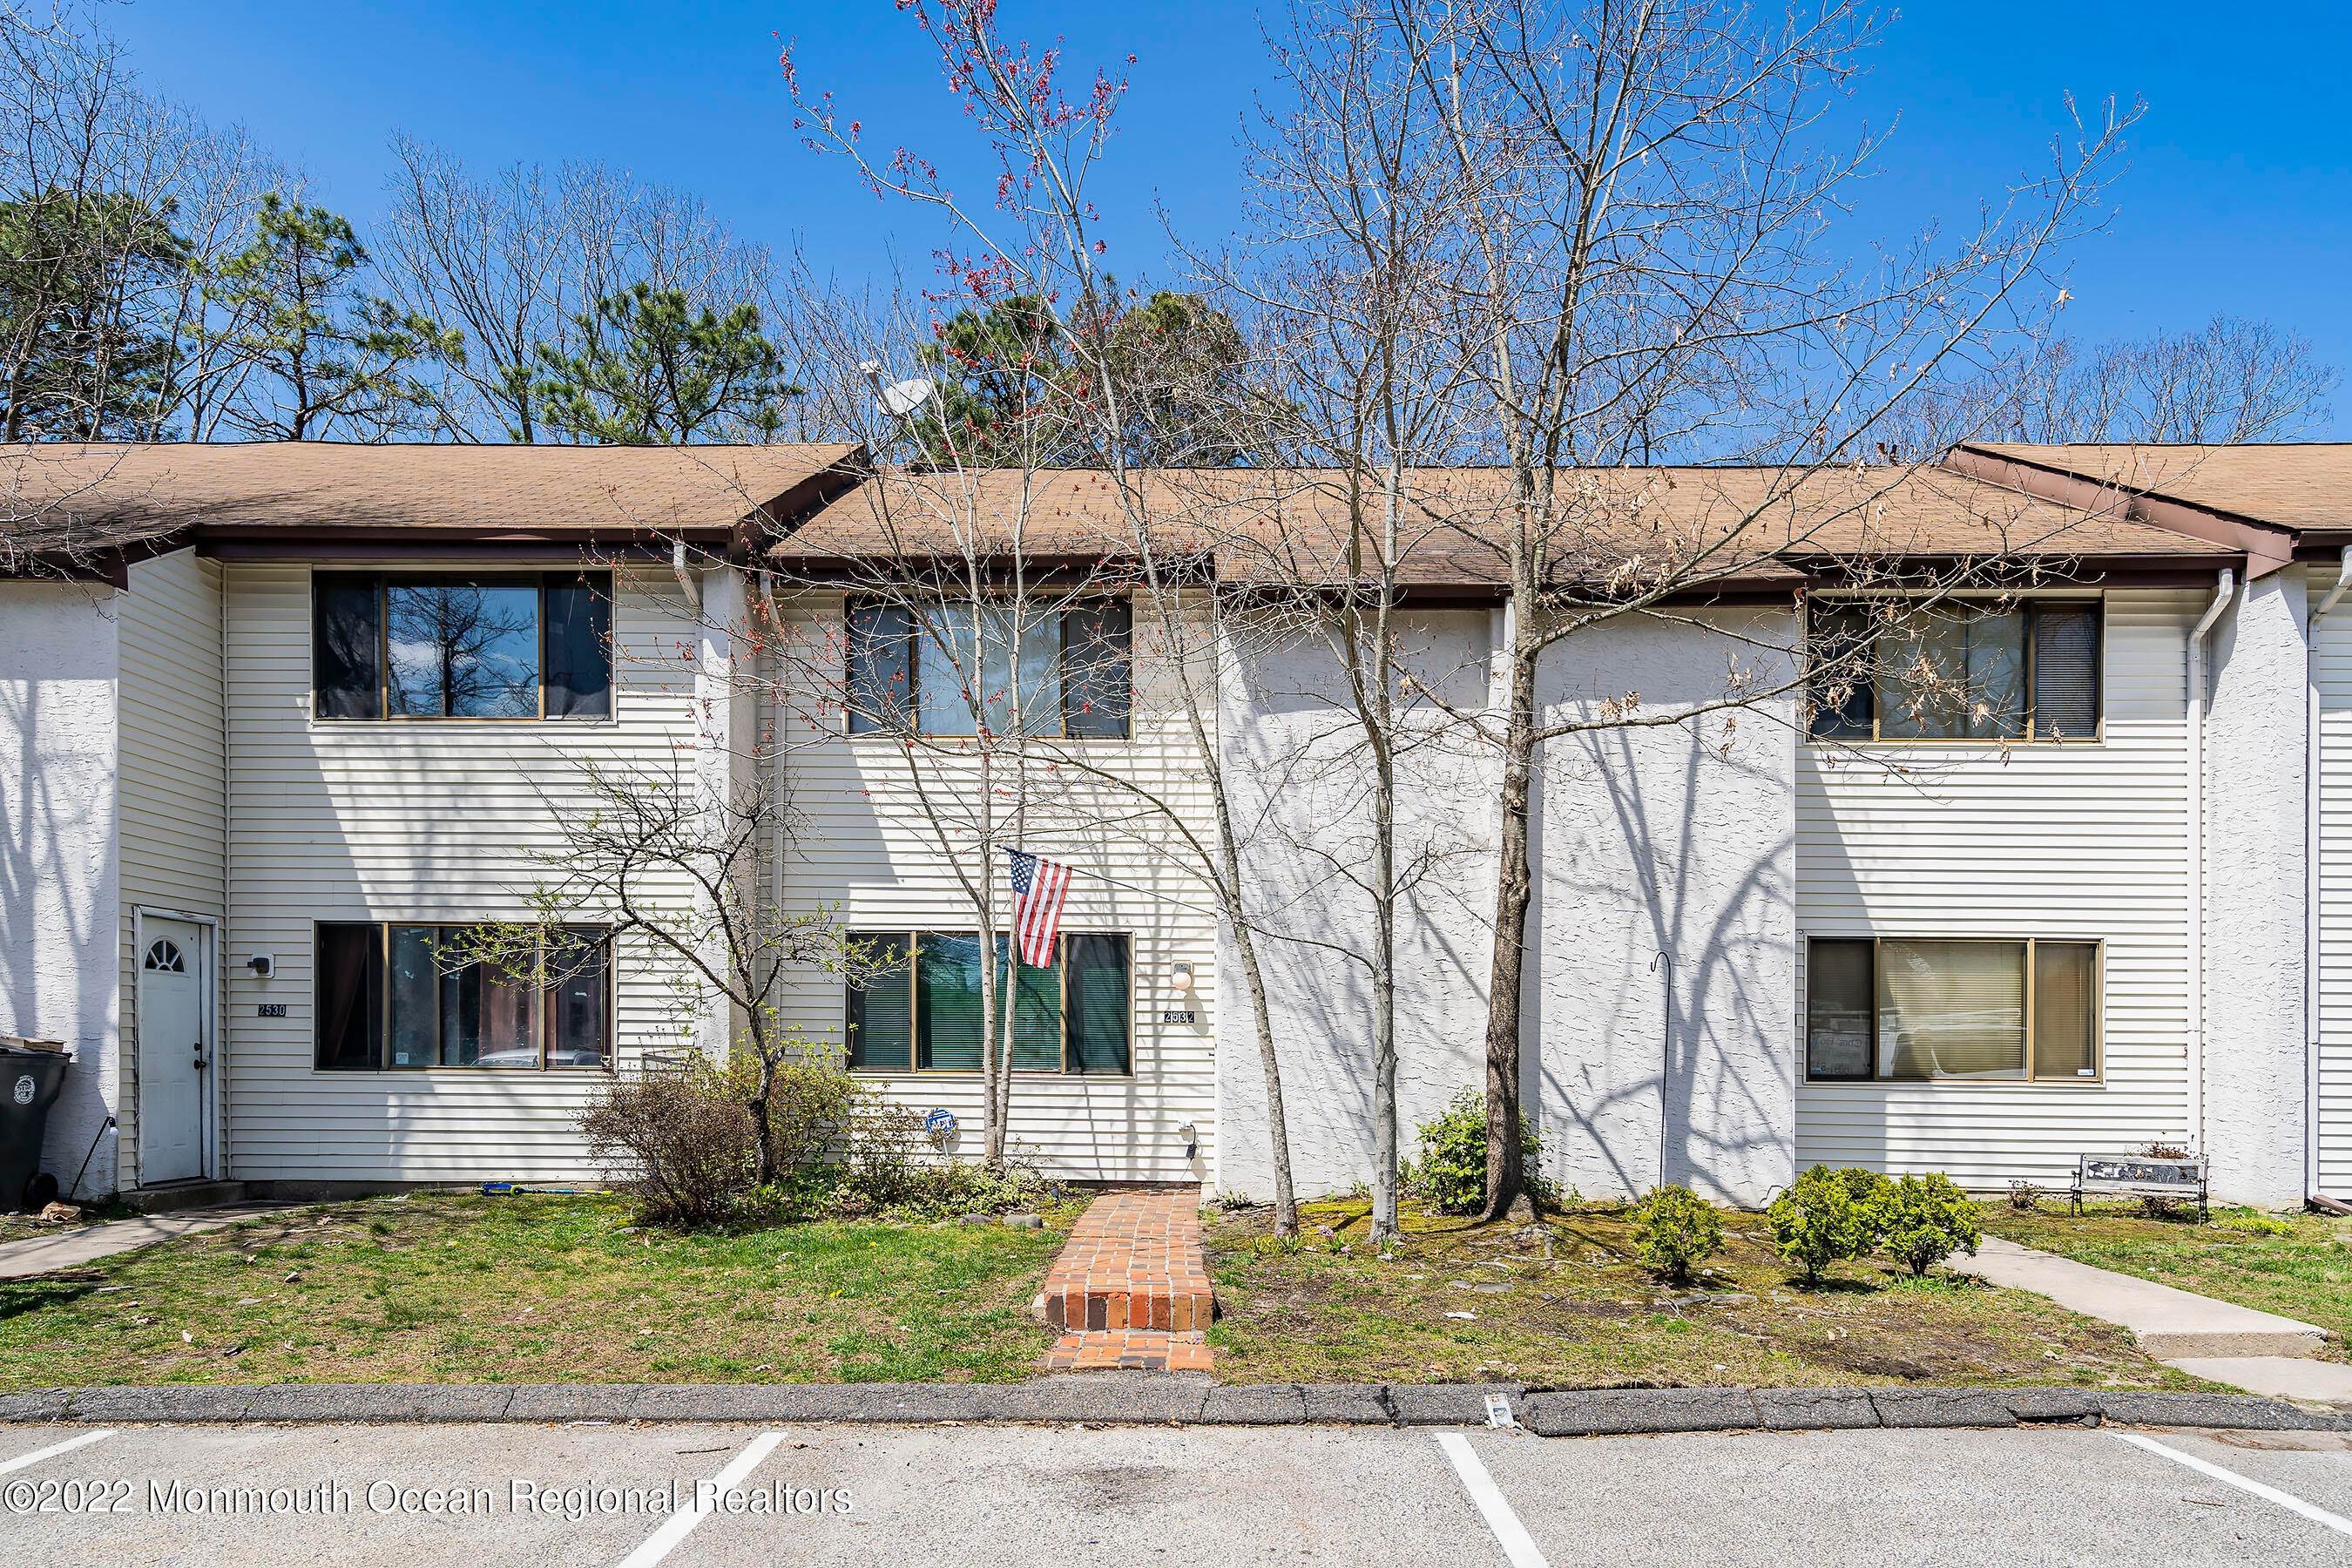 Condominiums for Sale at 2532 Cottonwood Court Mays Landing, New Jersey 08330 United States